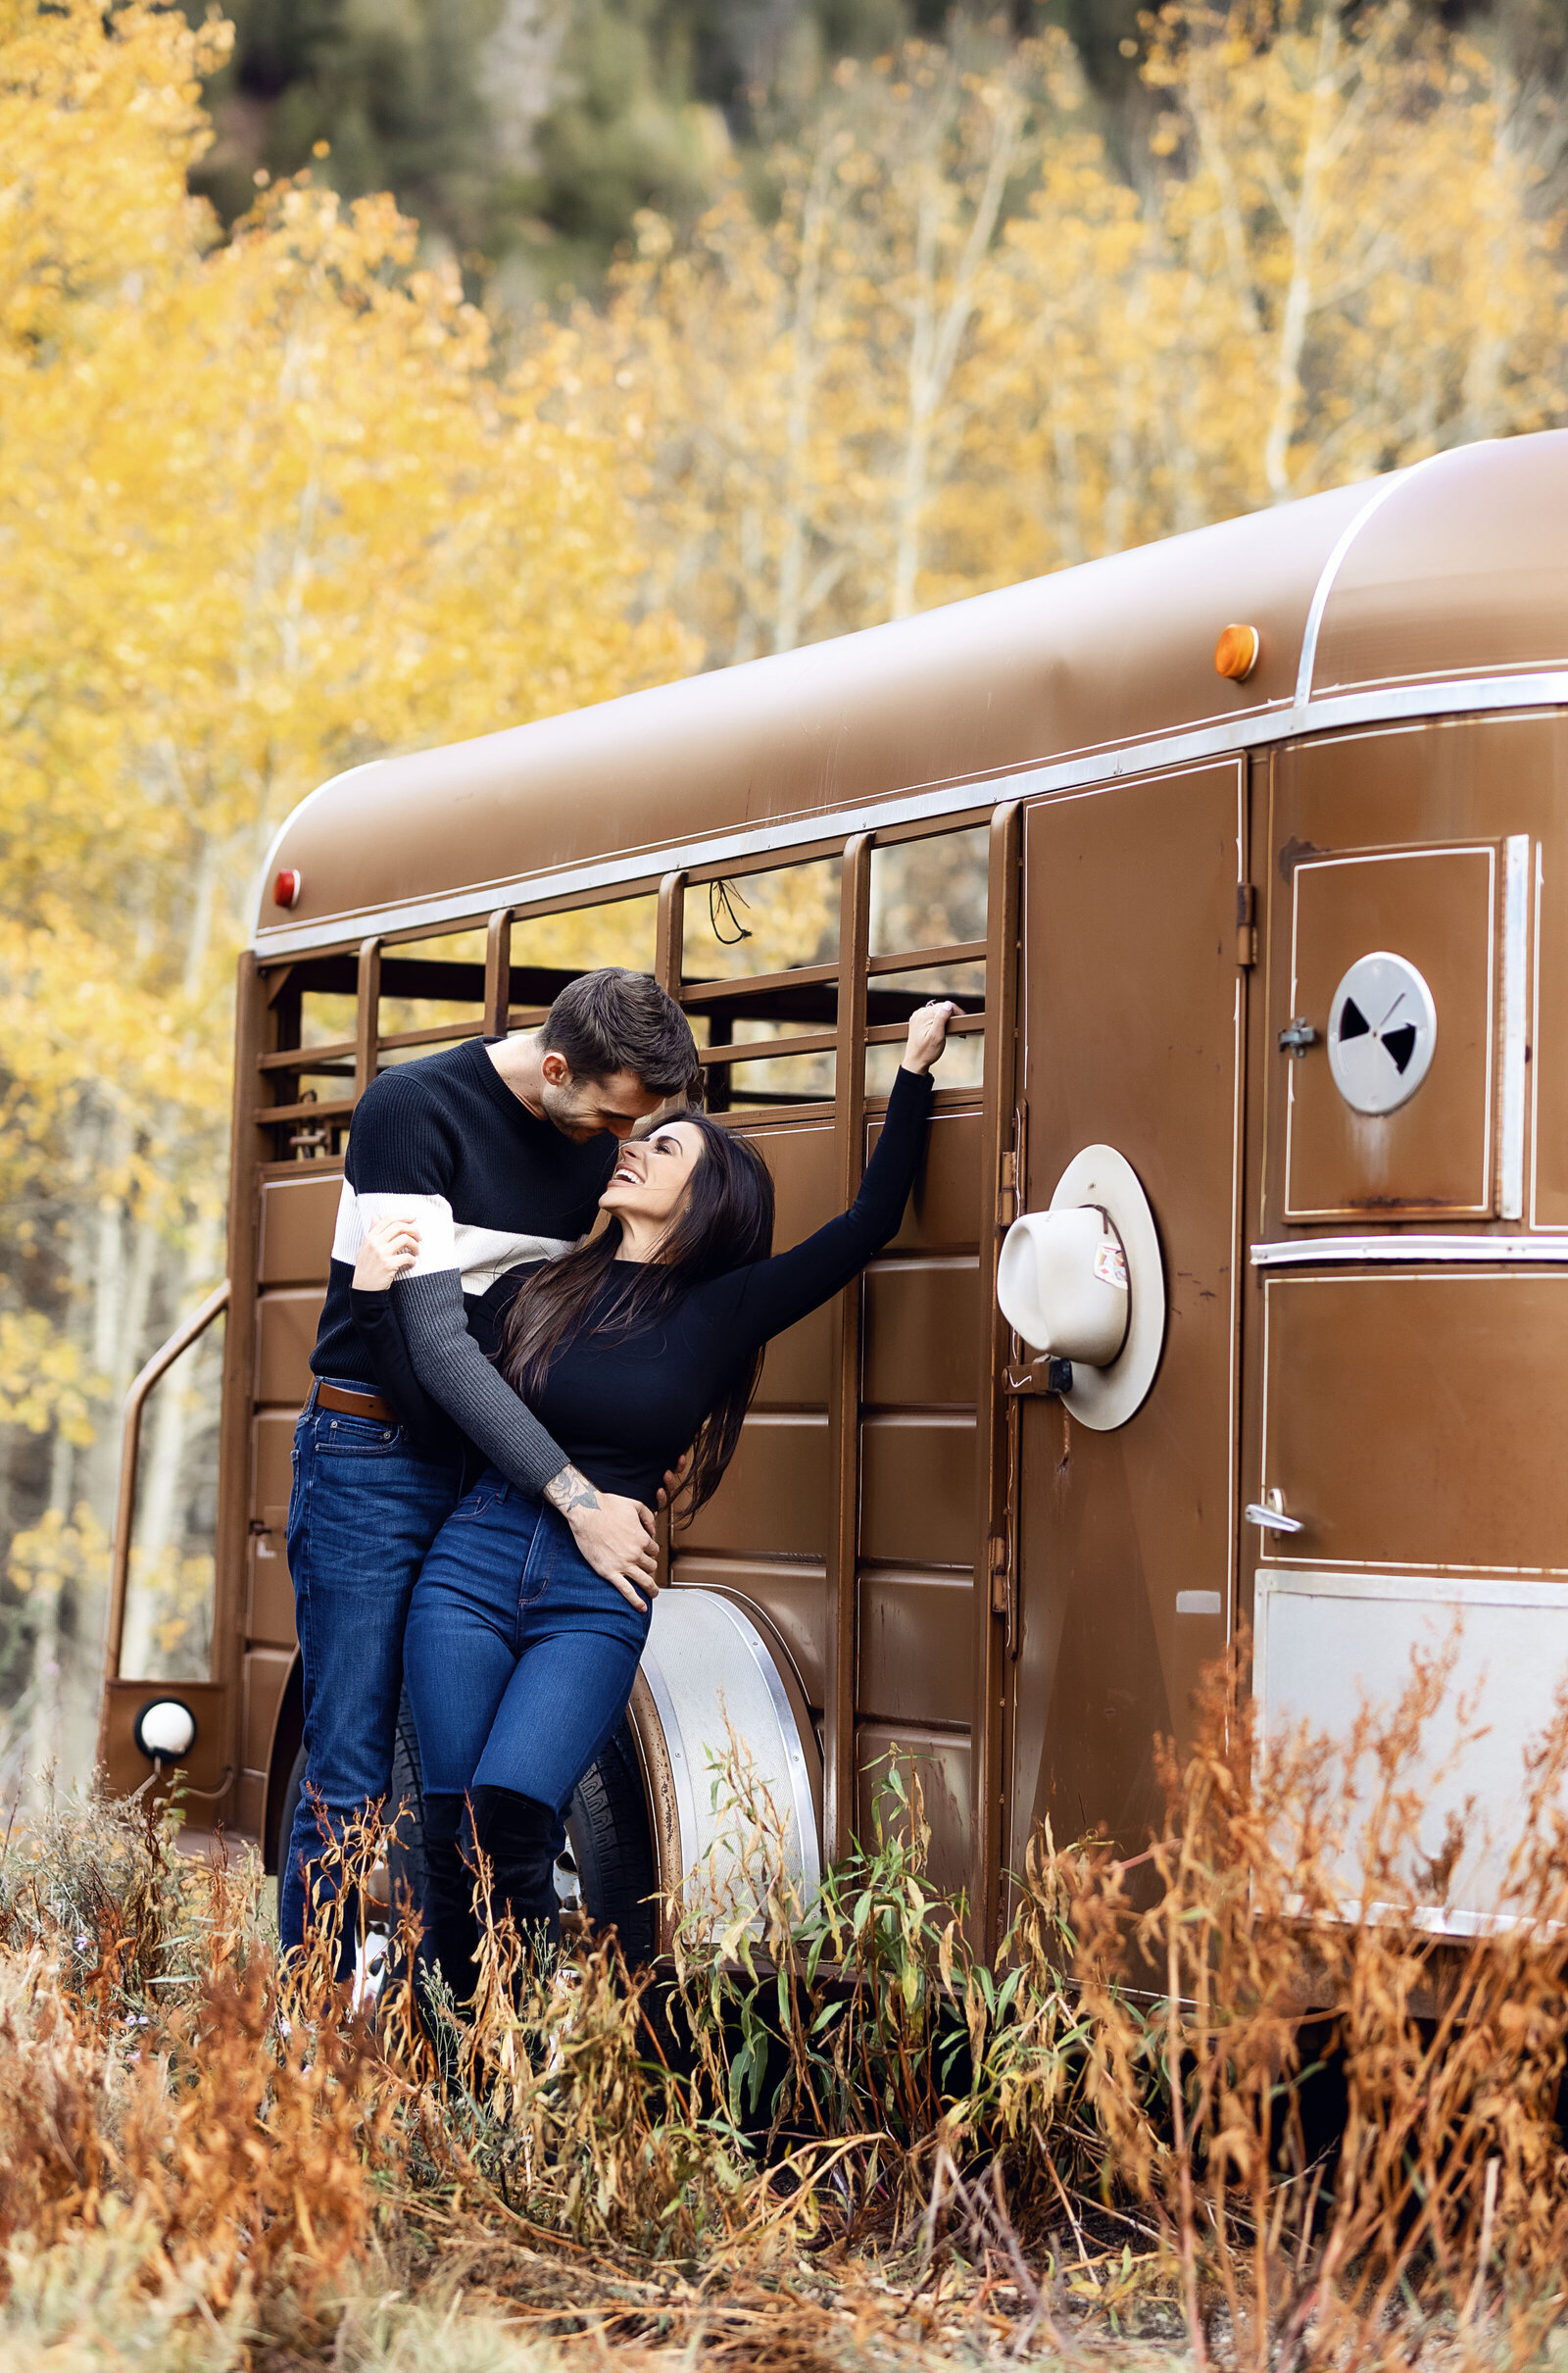 A good looking couple pose next to a horse trailer during their Aspen engagement photoshoot together.